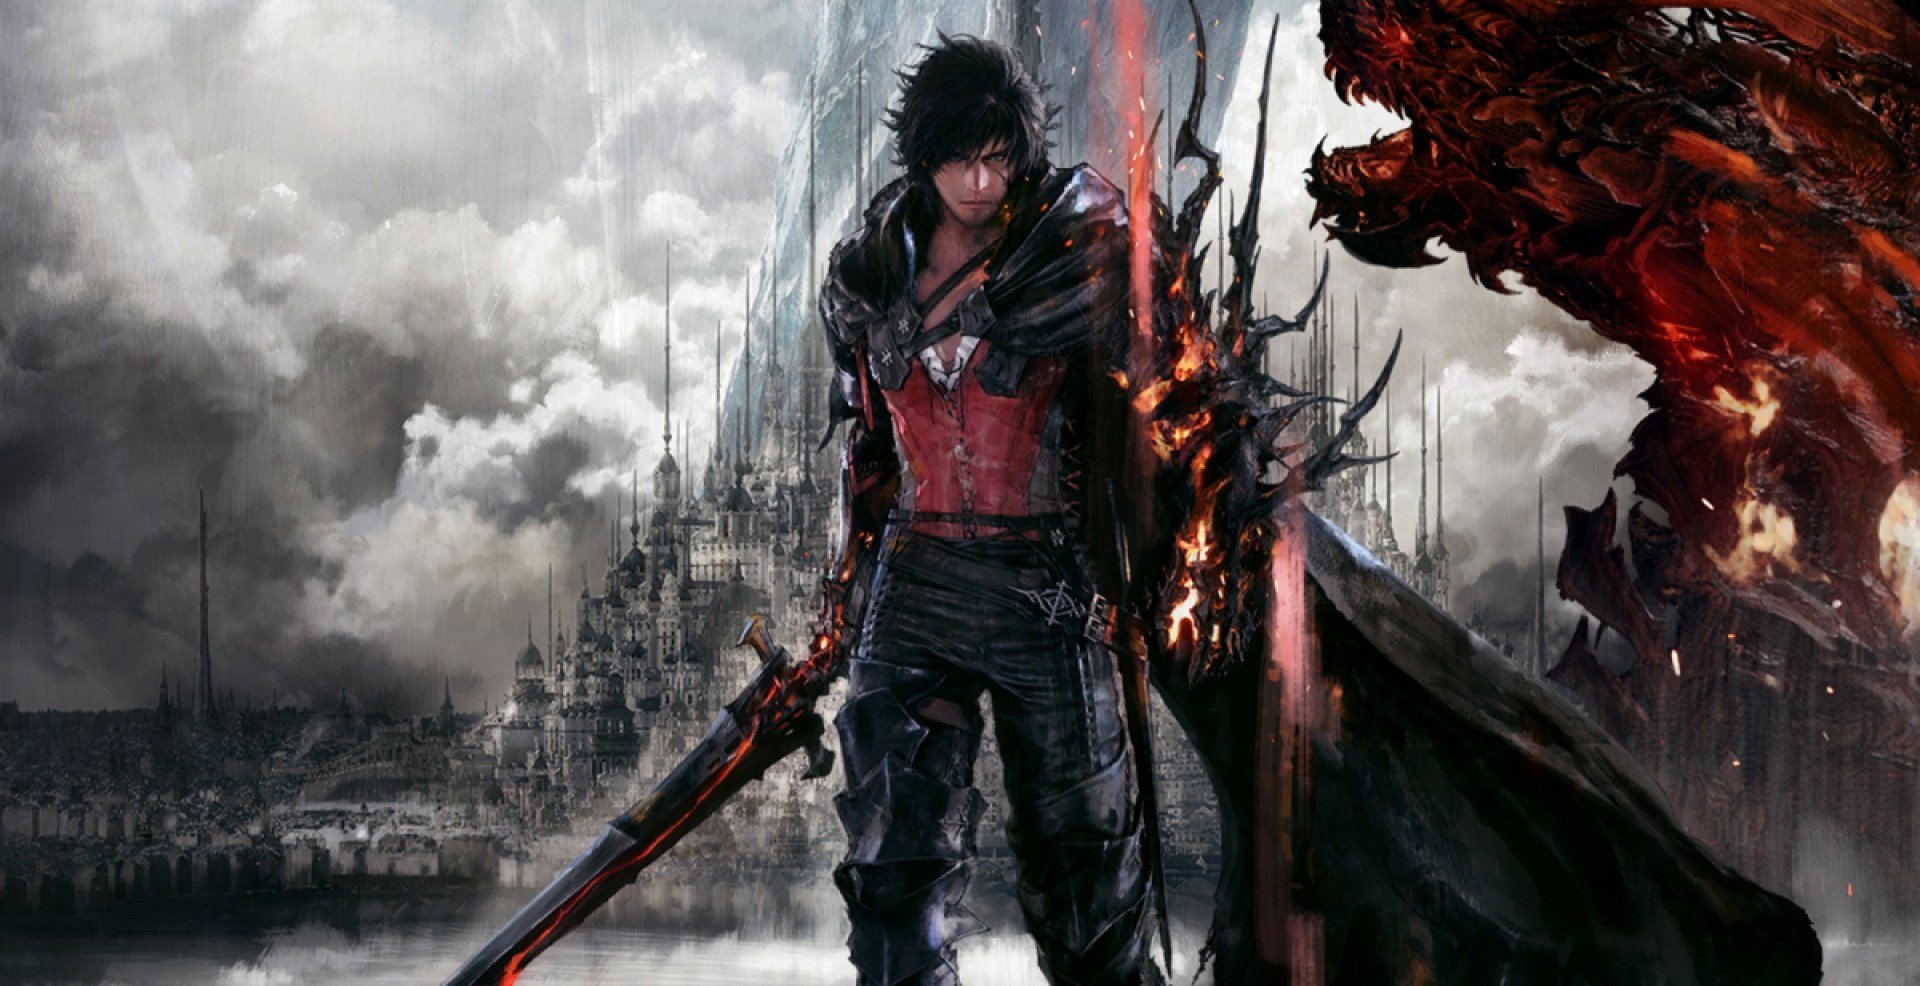 Clive, the protagonist from 'Final Fantasy XVI,' stands in the foreground. His left arm is covered in strange black spikes and glows with fire. In his right hand, he holds a sword.